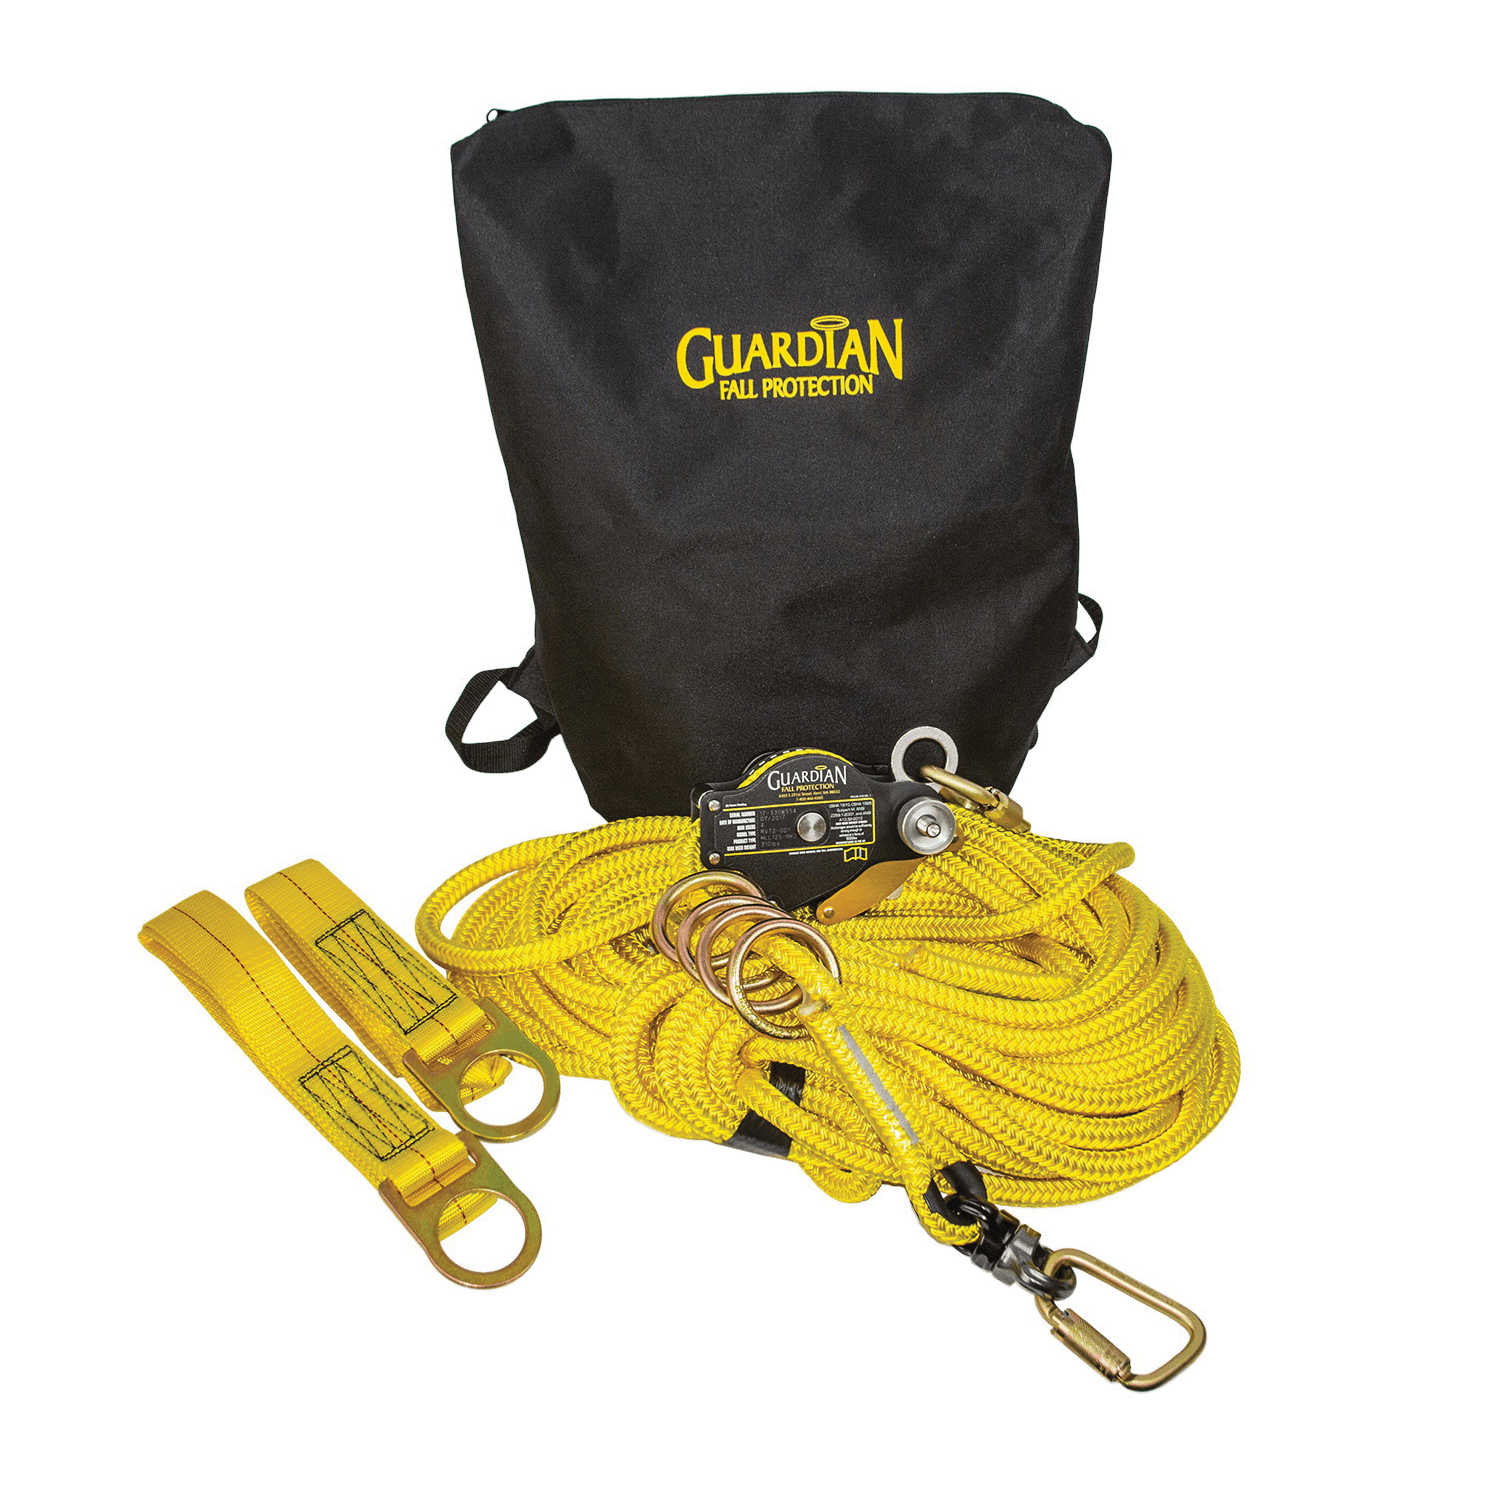 GUARDIAN FALL PROTECTION 30800